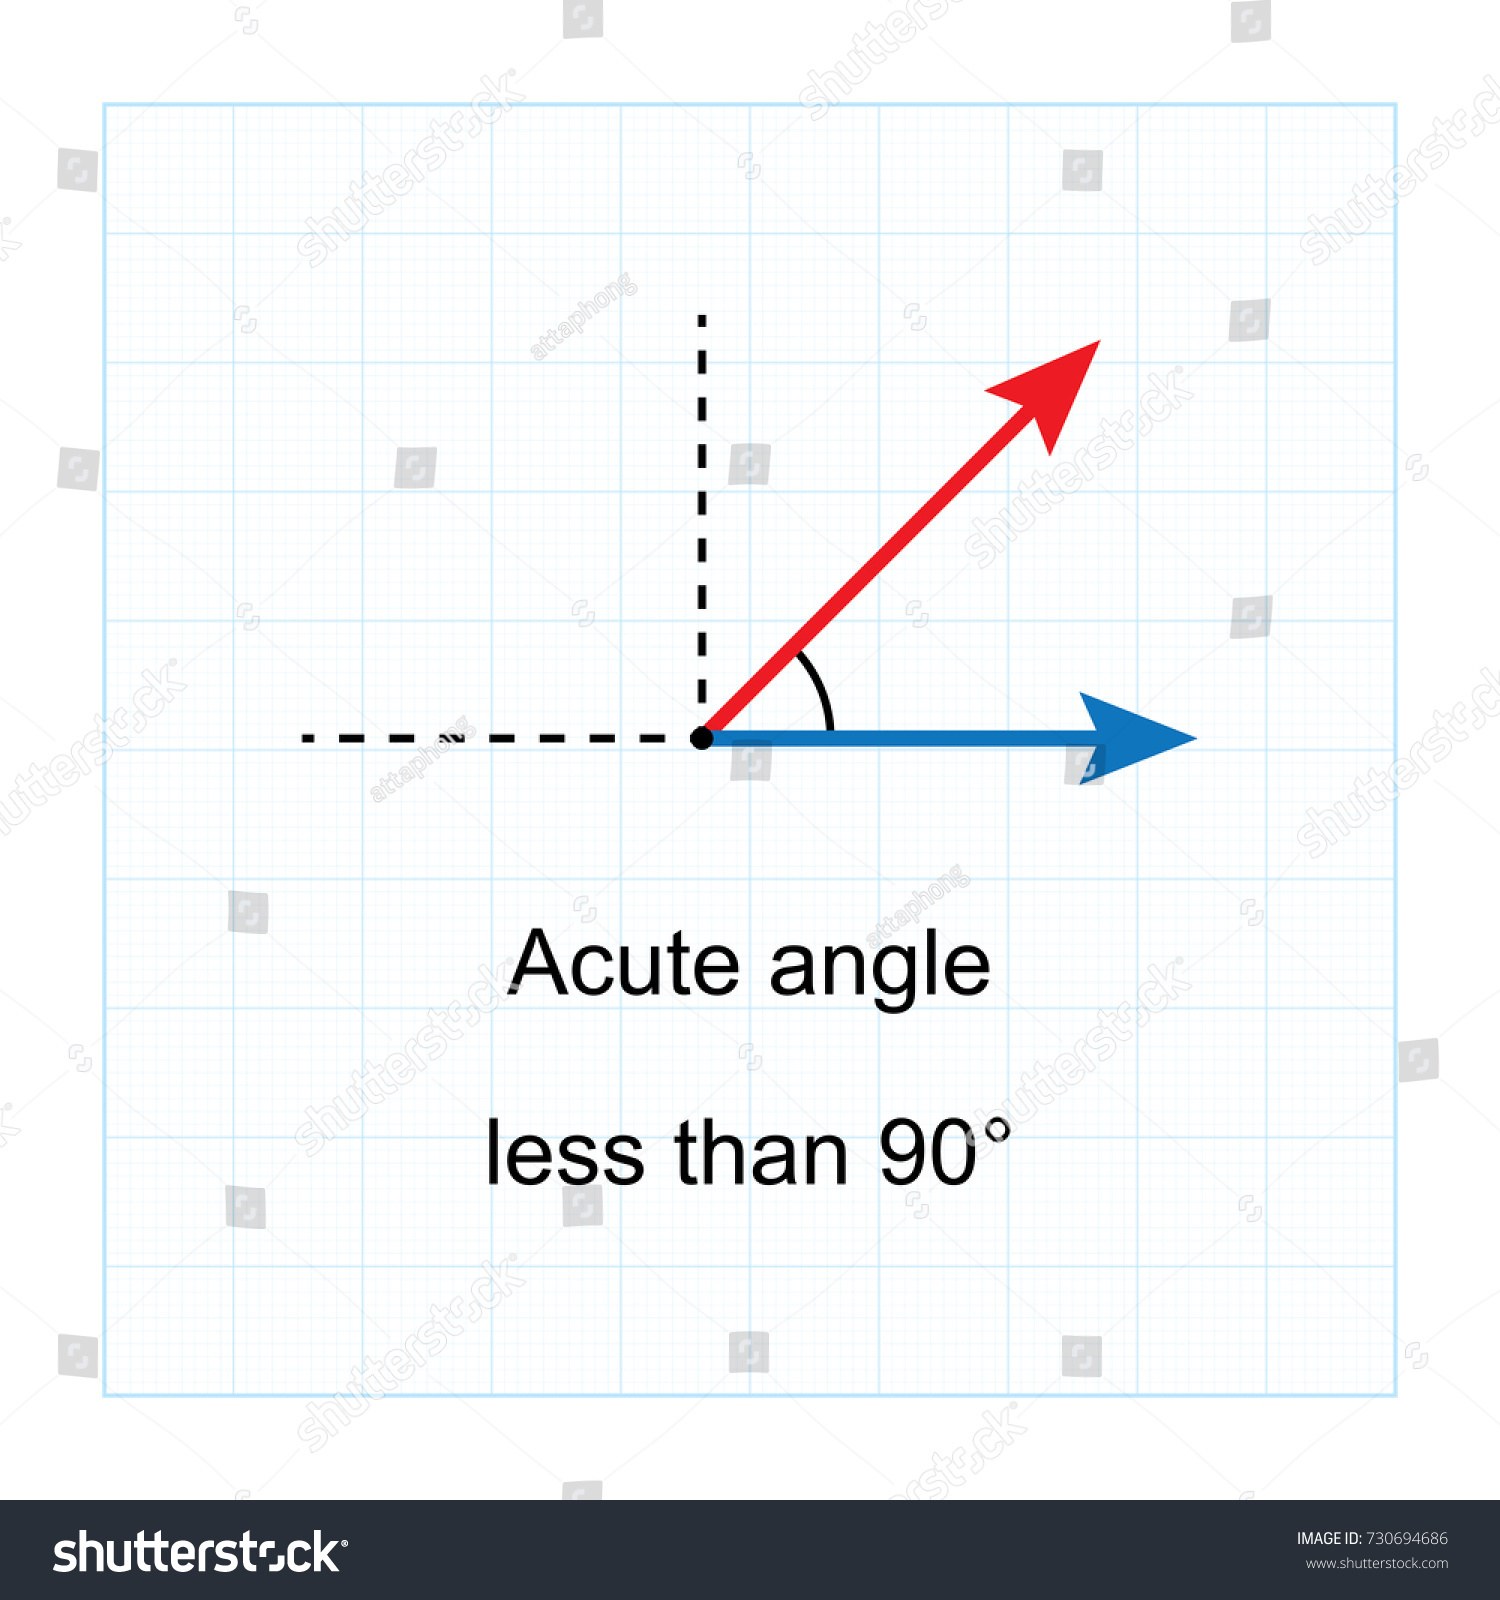 SVG of Types of Angles.  on blue graph background vector illustration
 svg